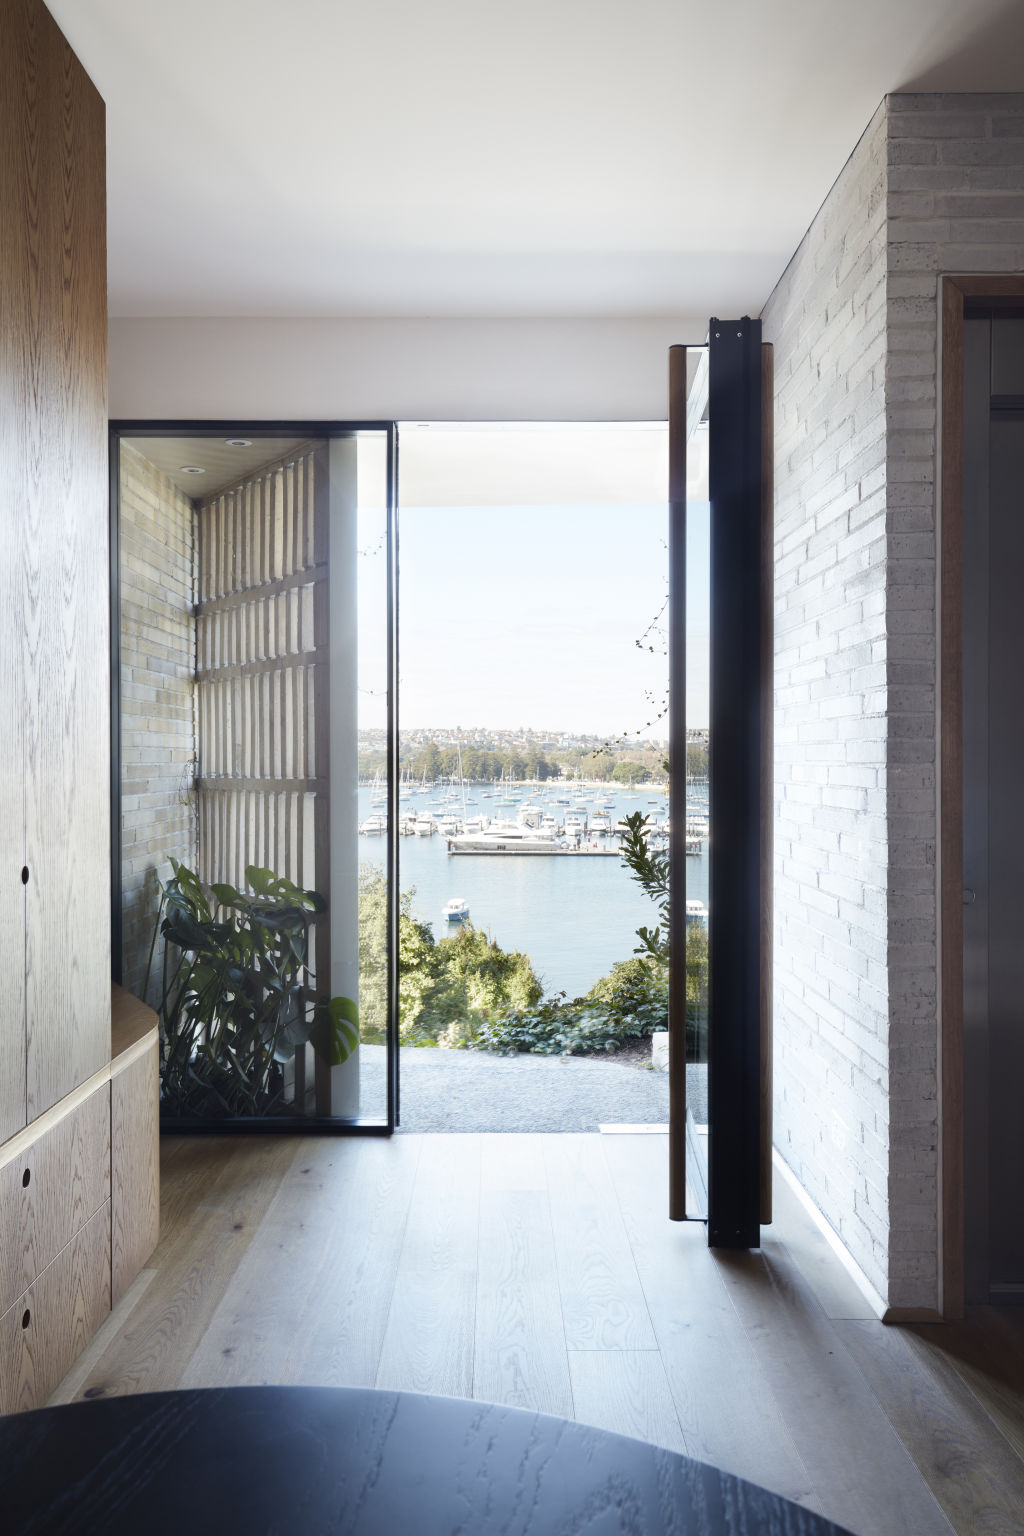 The front door offers the first glimpses of Sydney Harbour. Photo: Supplied